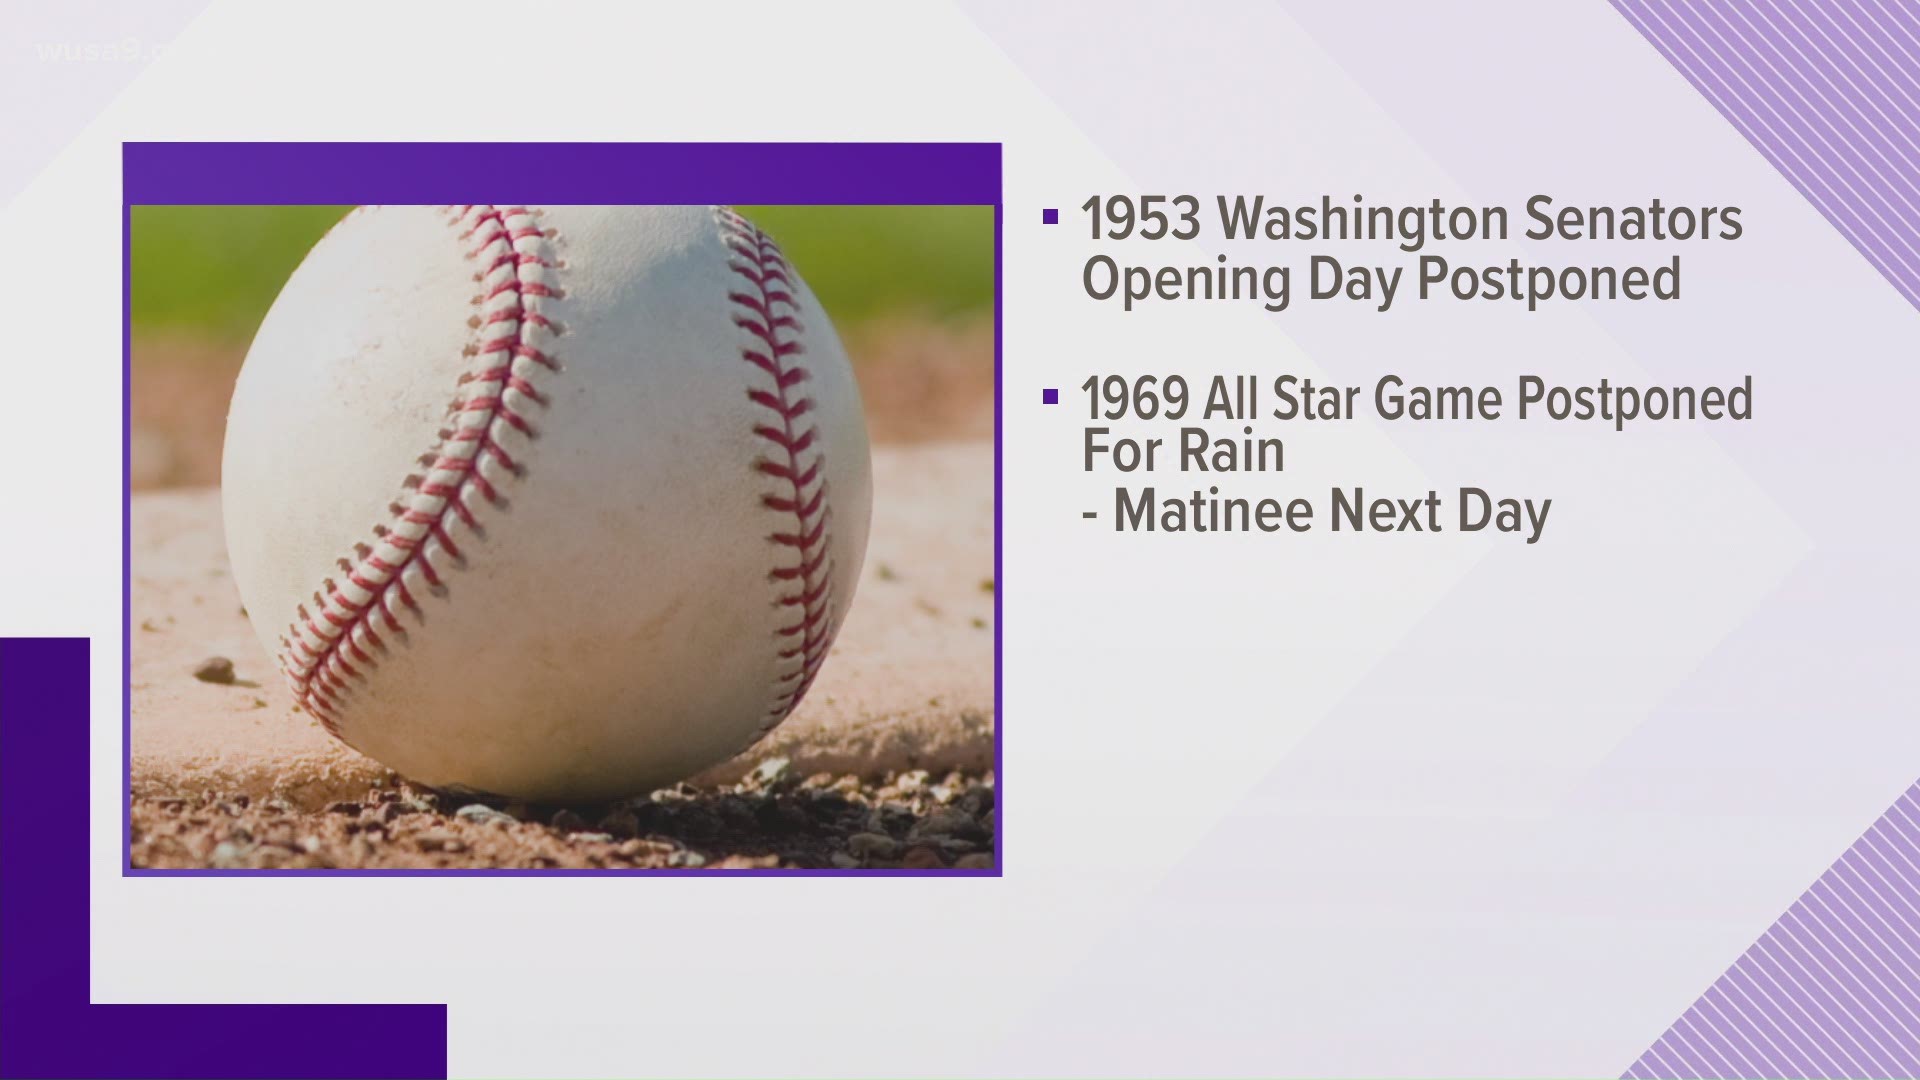 Thursday's "COVID-out" follows rain outs in 1945 and 1953, All-Star game in 1969